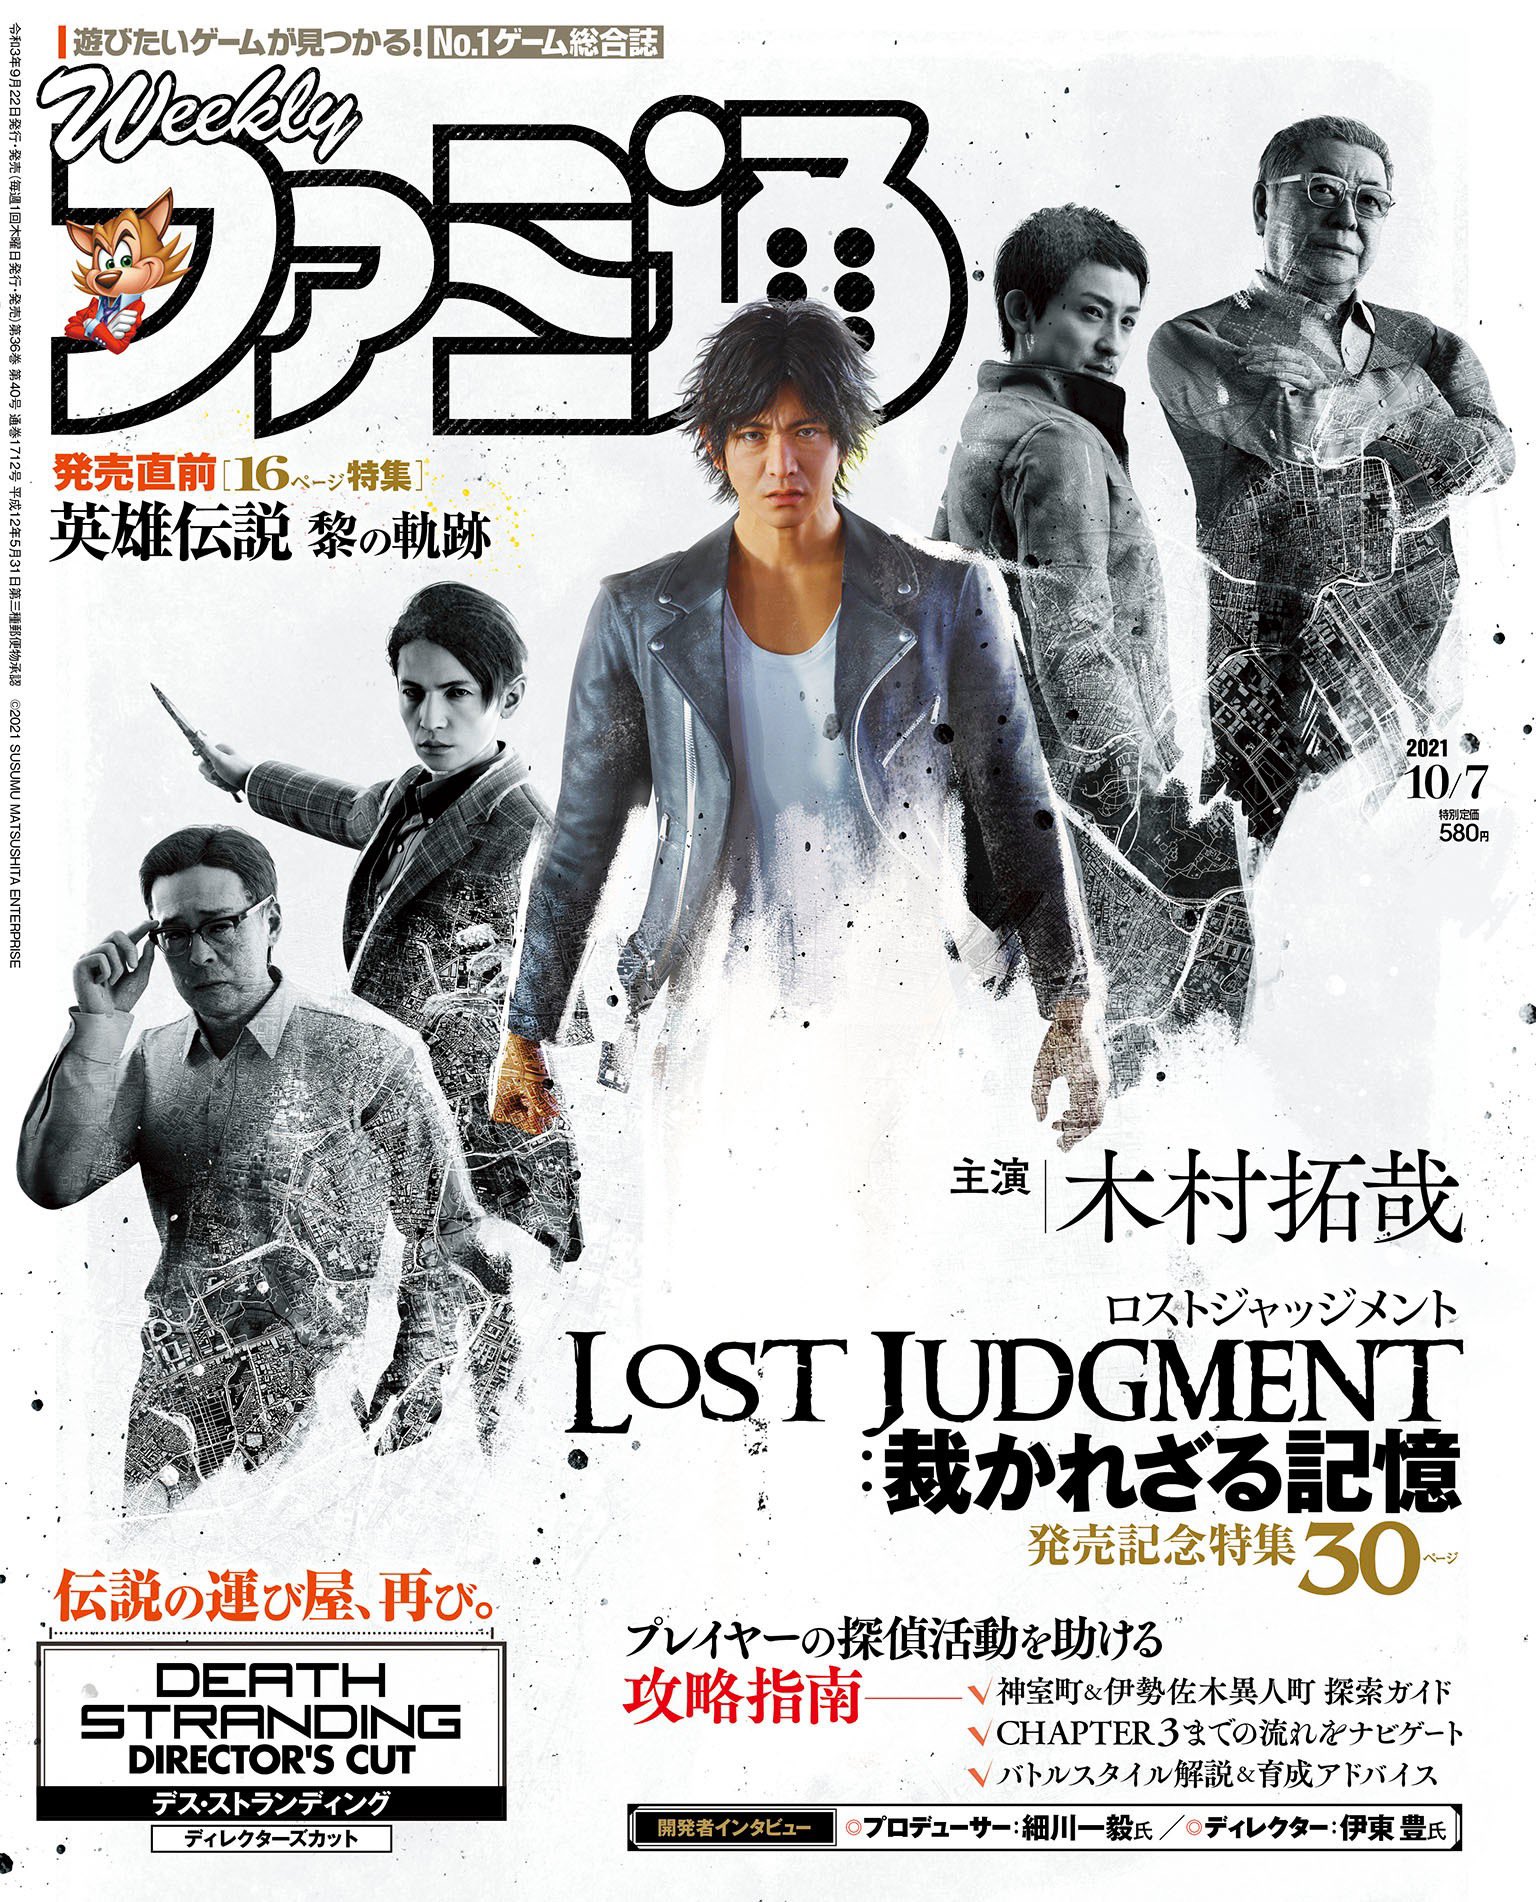 Lost Judgment Headlines The October 7th Issue Of Famitsu Final Weapon